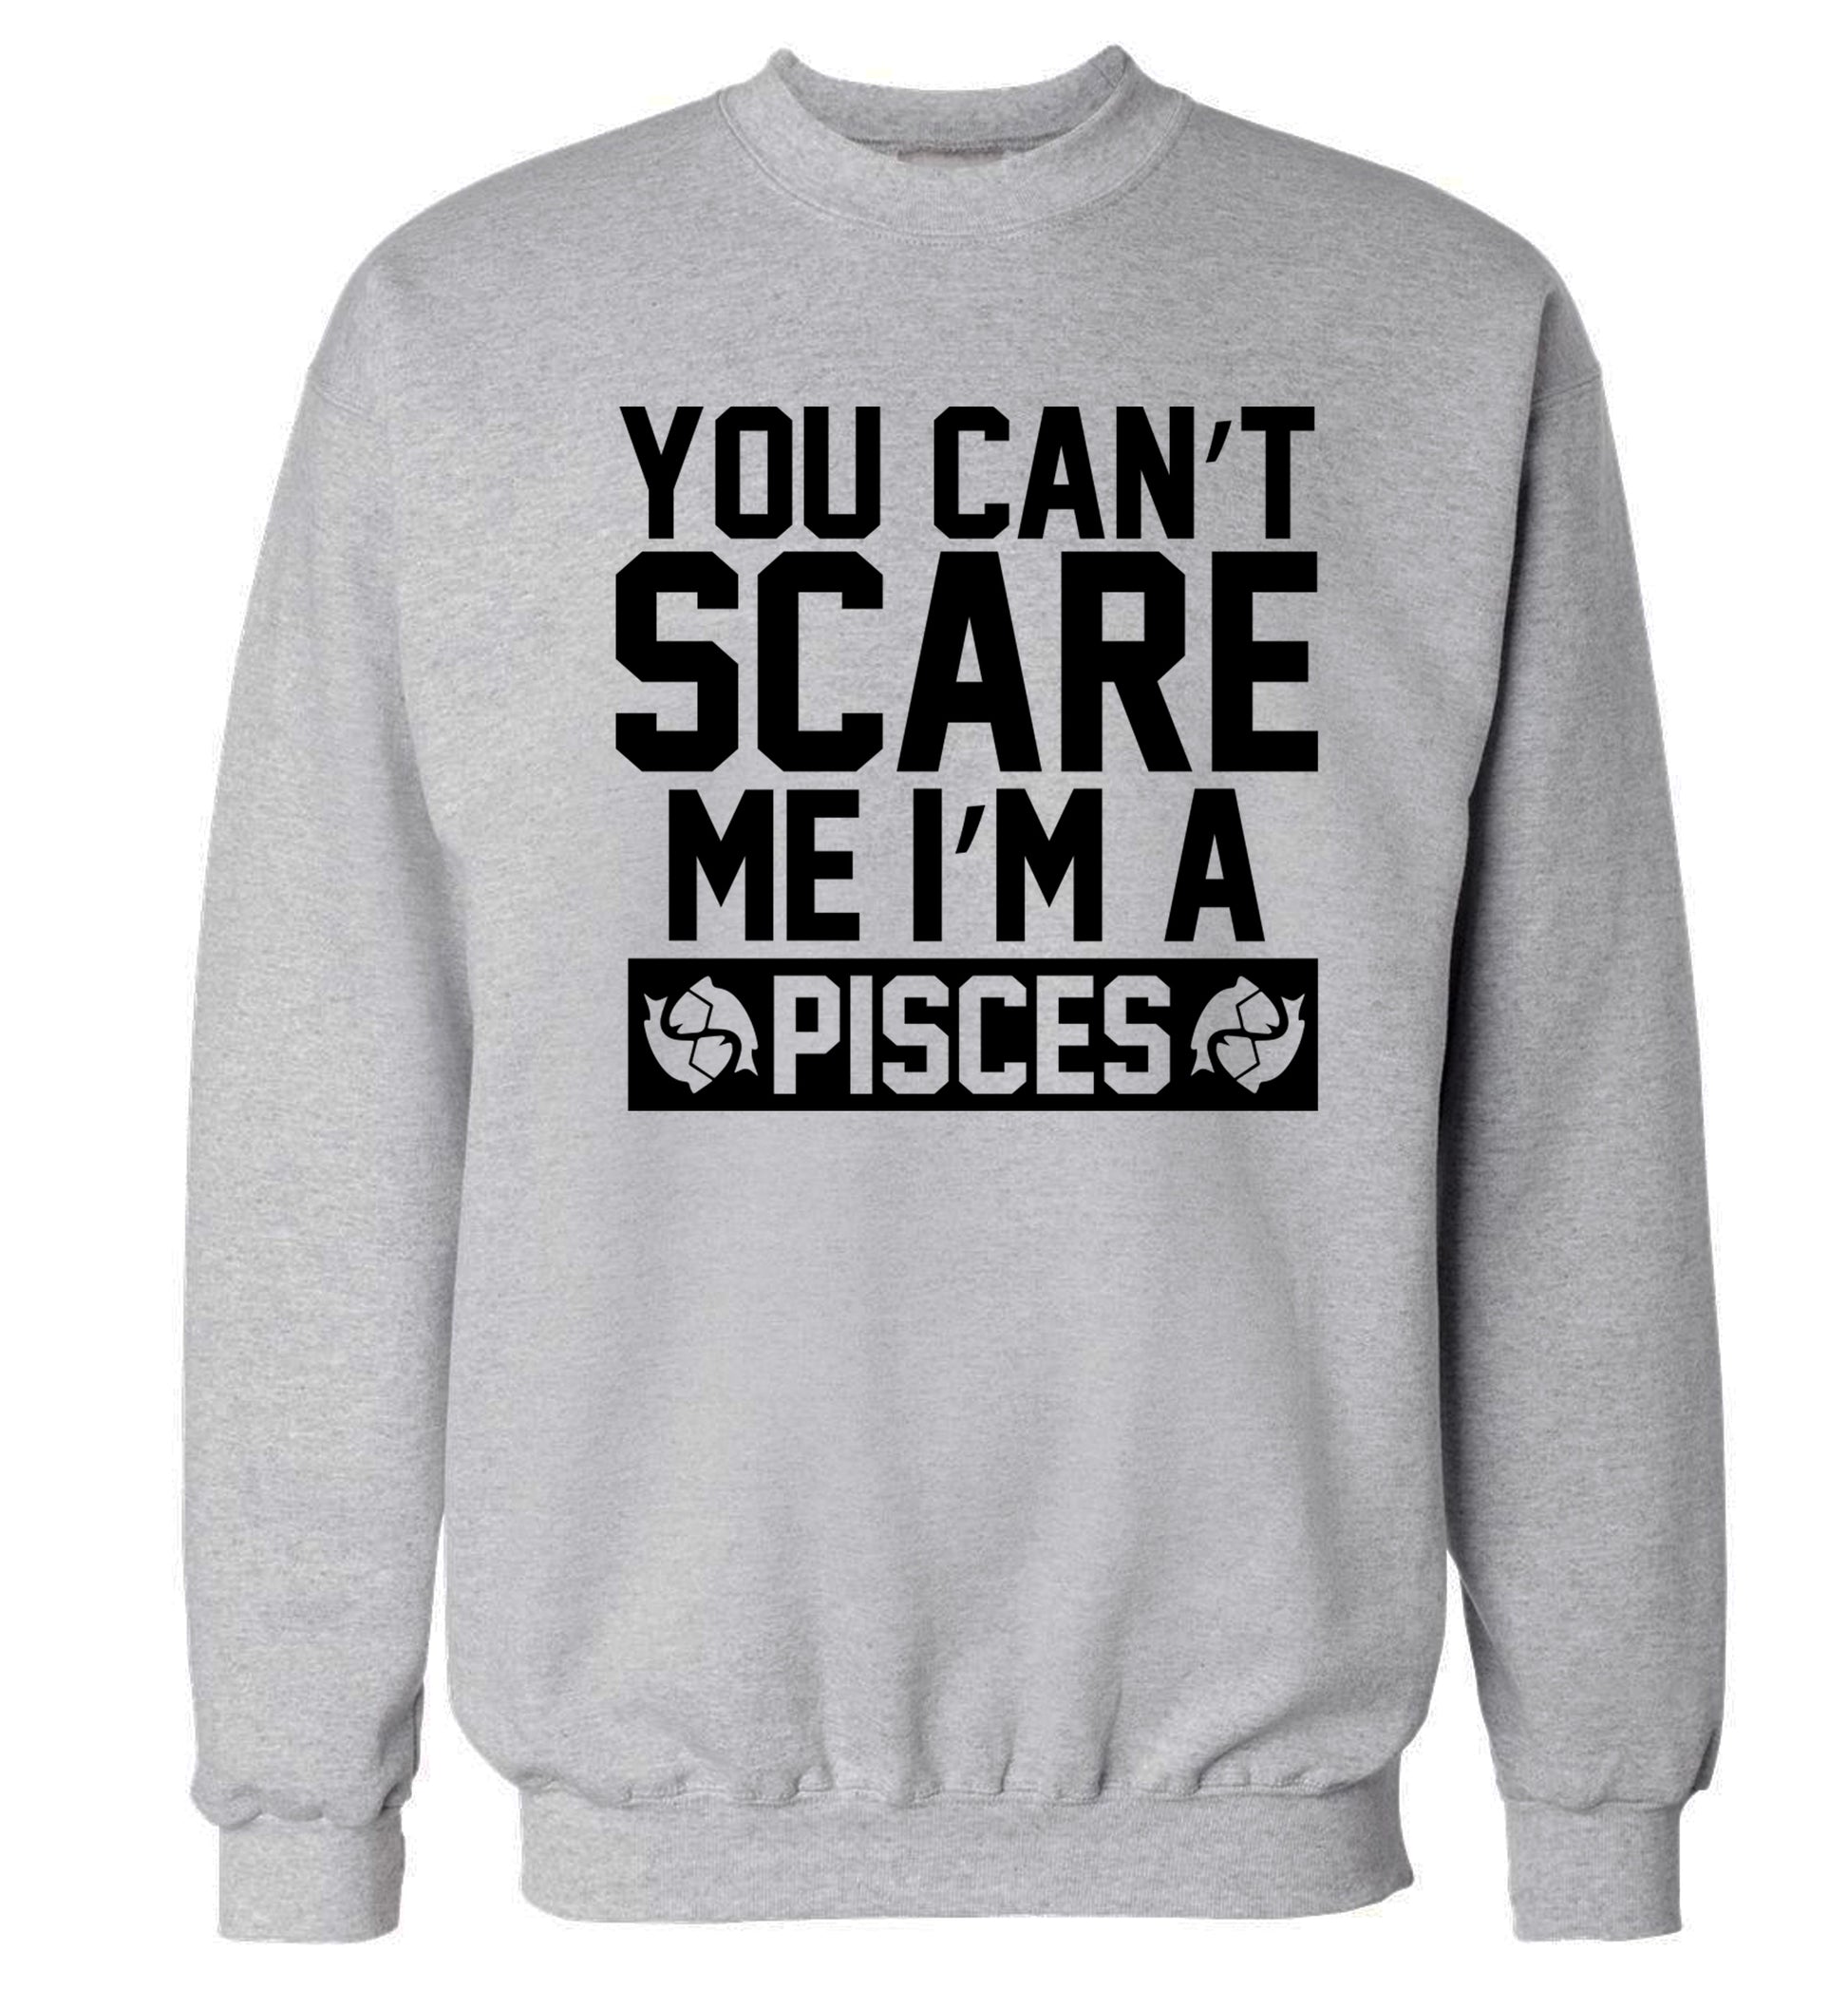 You can't scare me I'm a pisces Adult's unisex grey Sweater 2XL